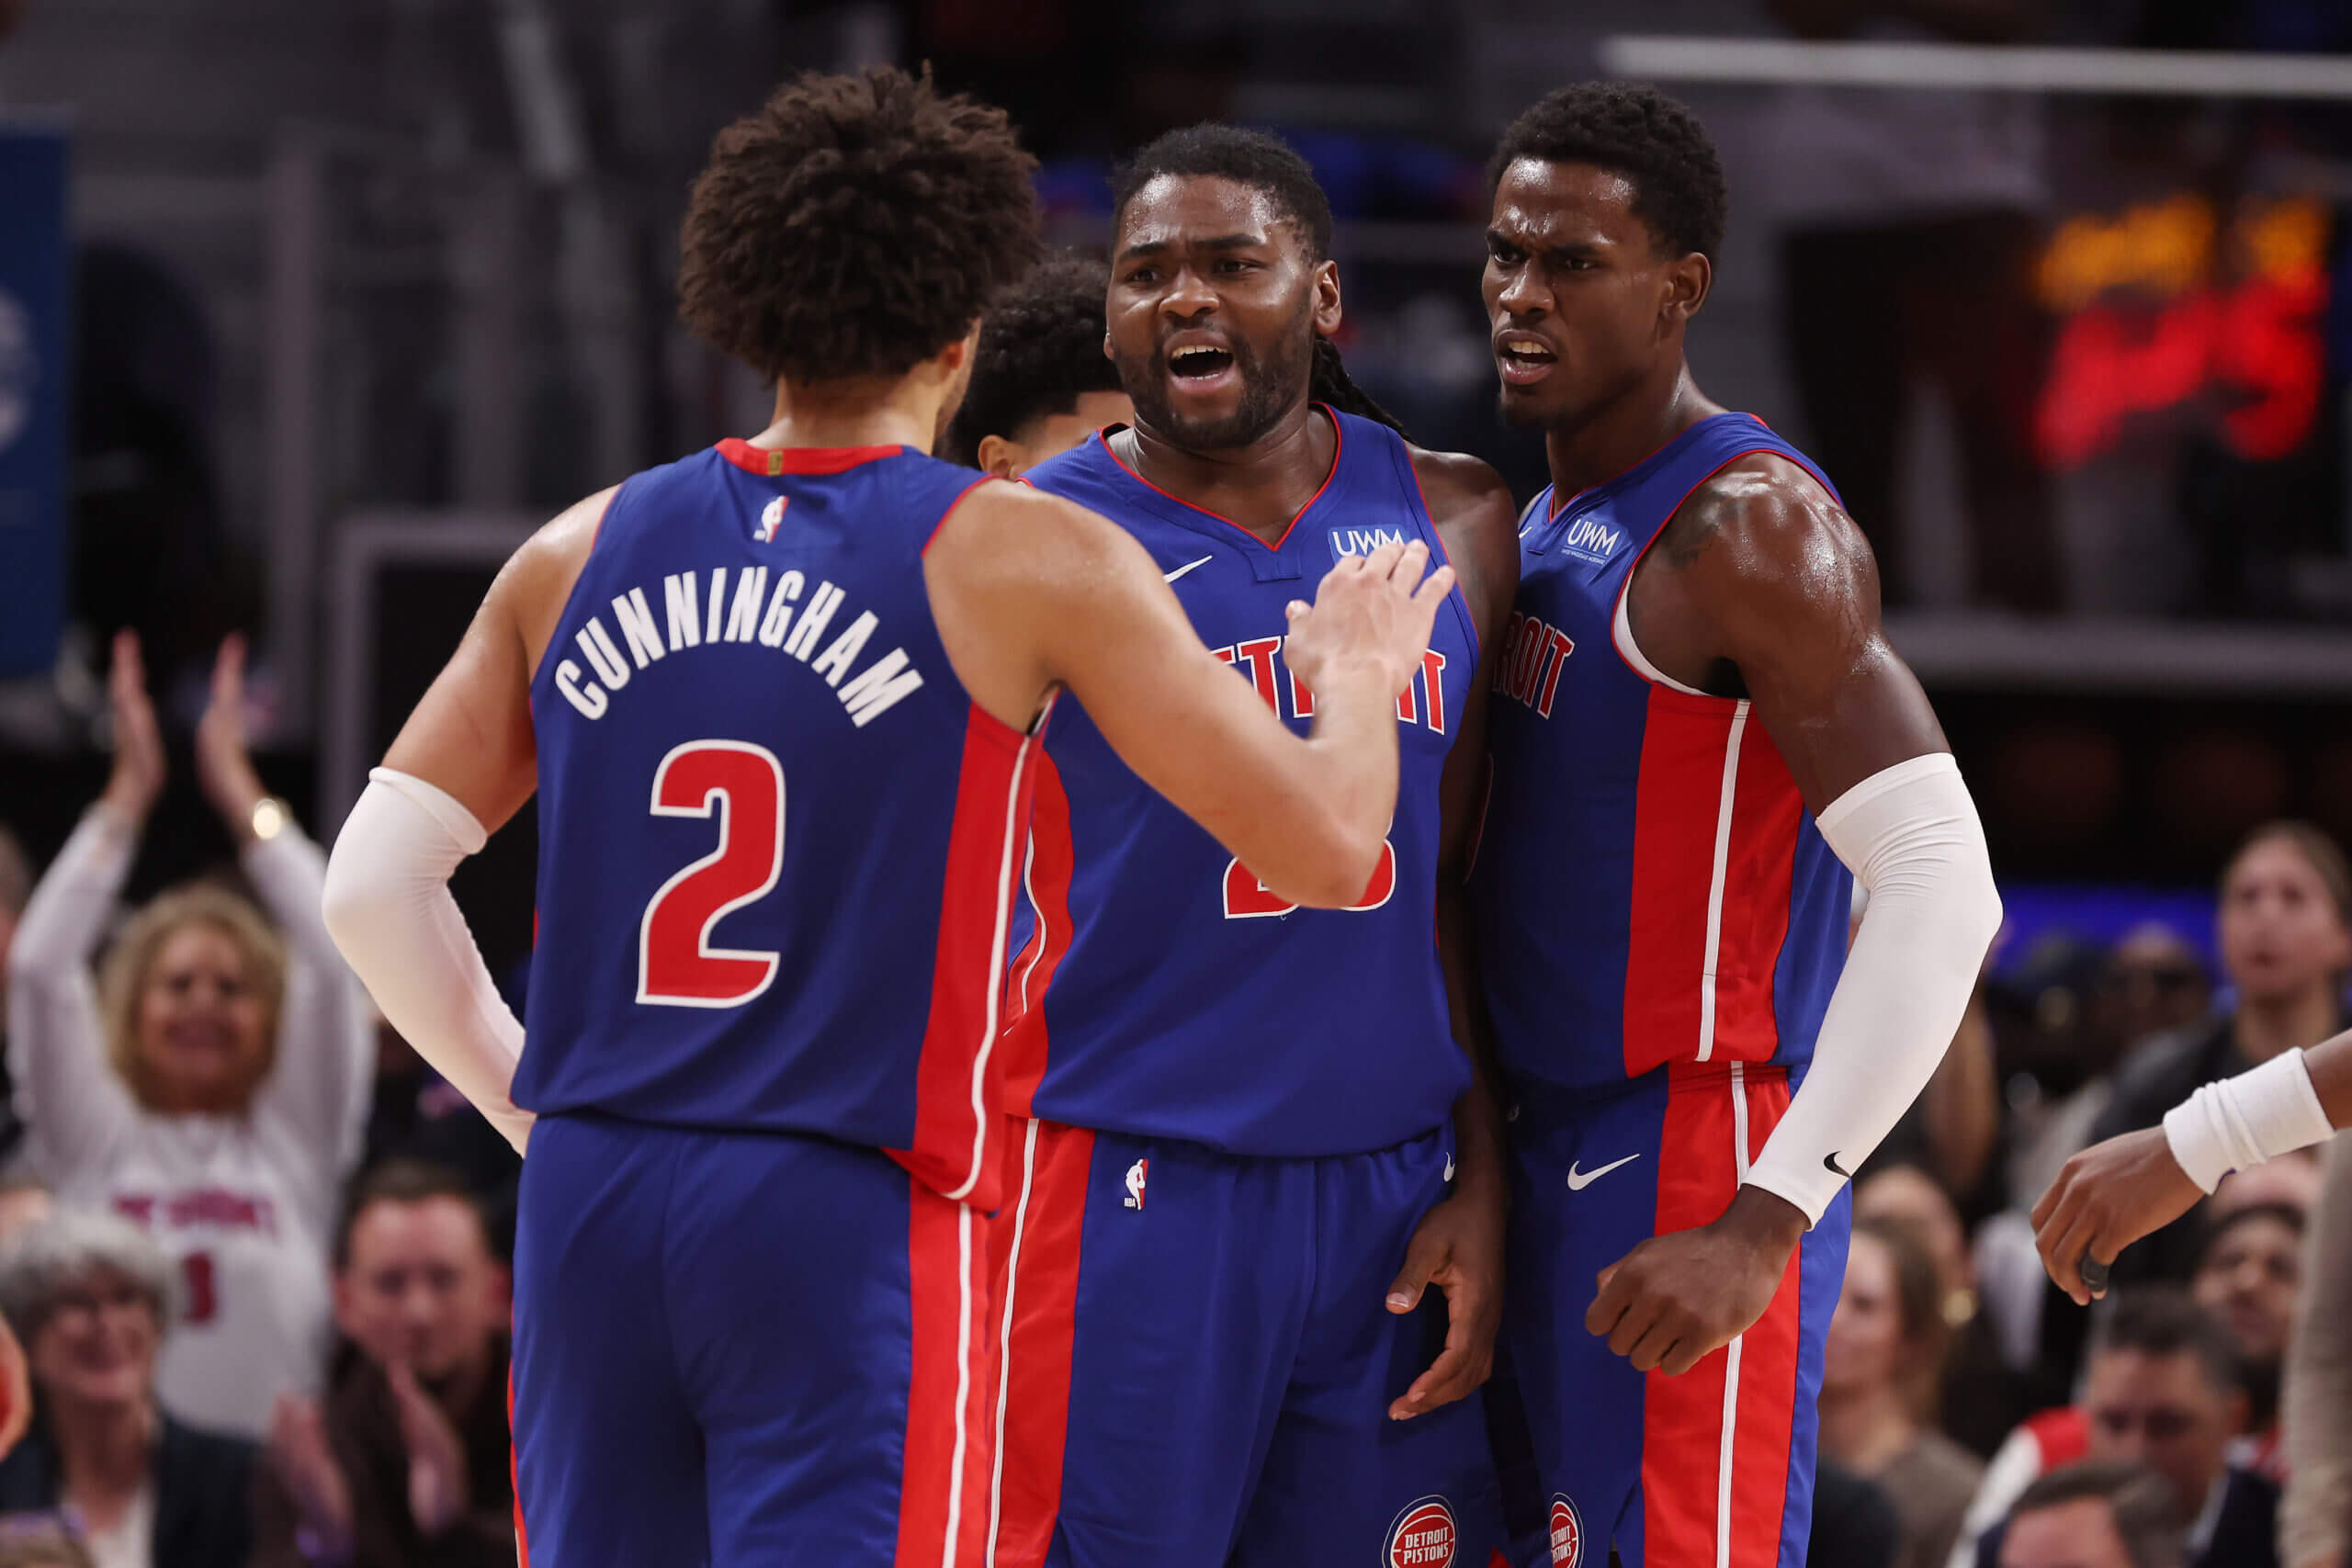 For the Pistons to surprise this season, growth on defense is a must